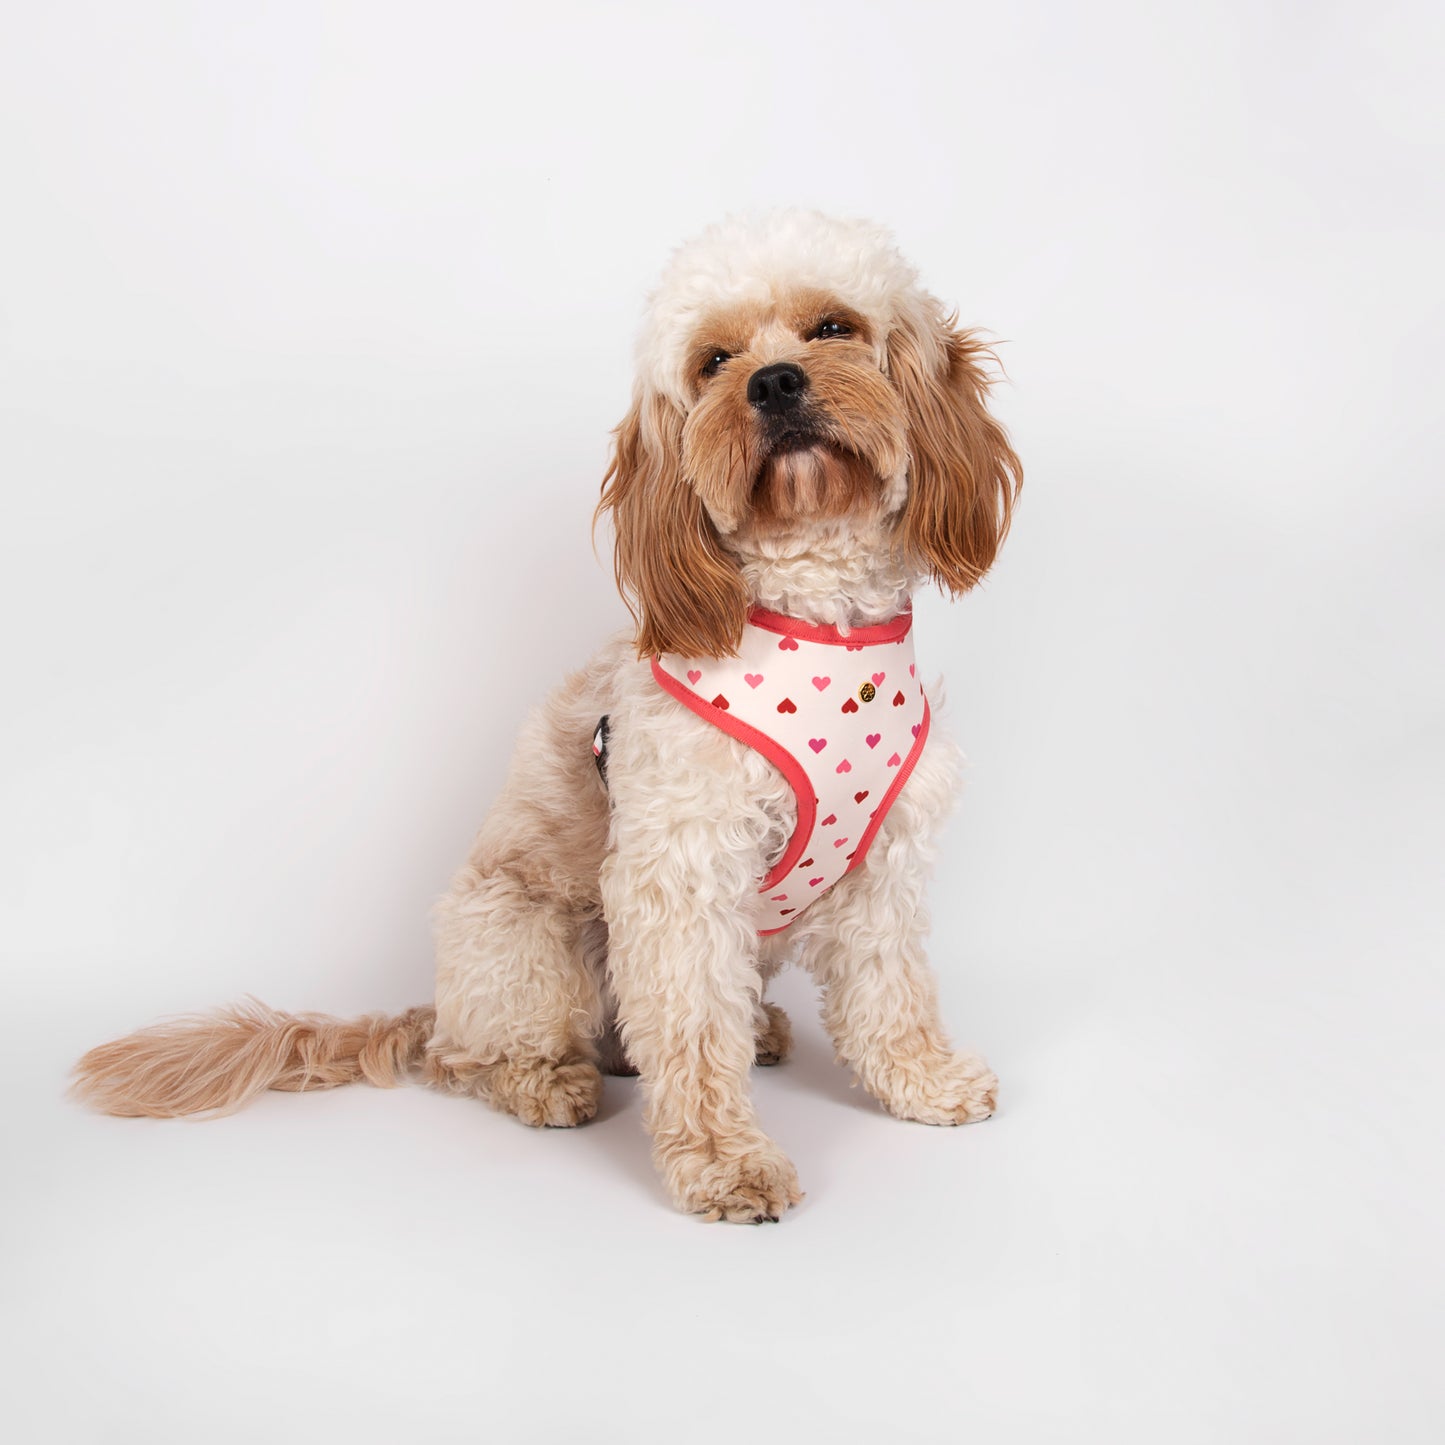 Pata Paw blush hearts reversible harness as seen in a medium-sized dog.